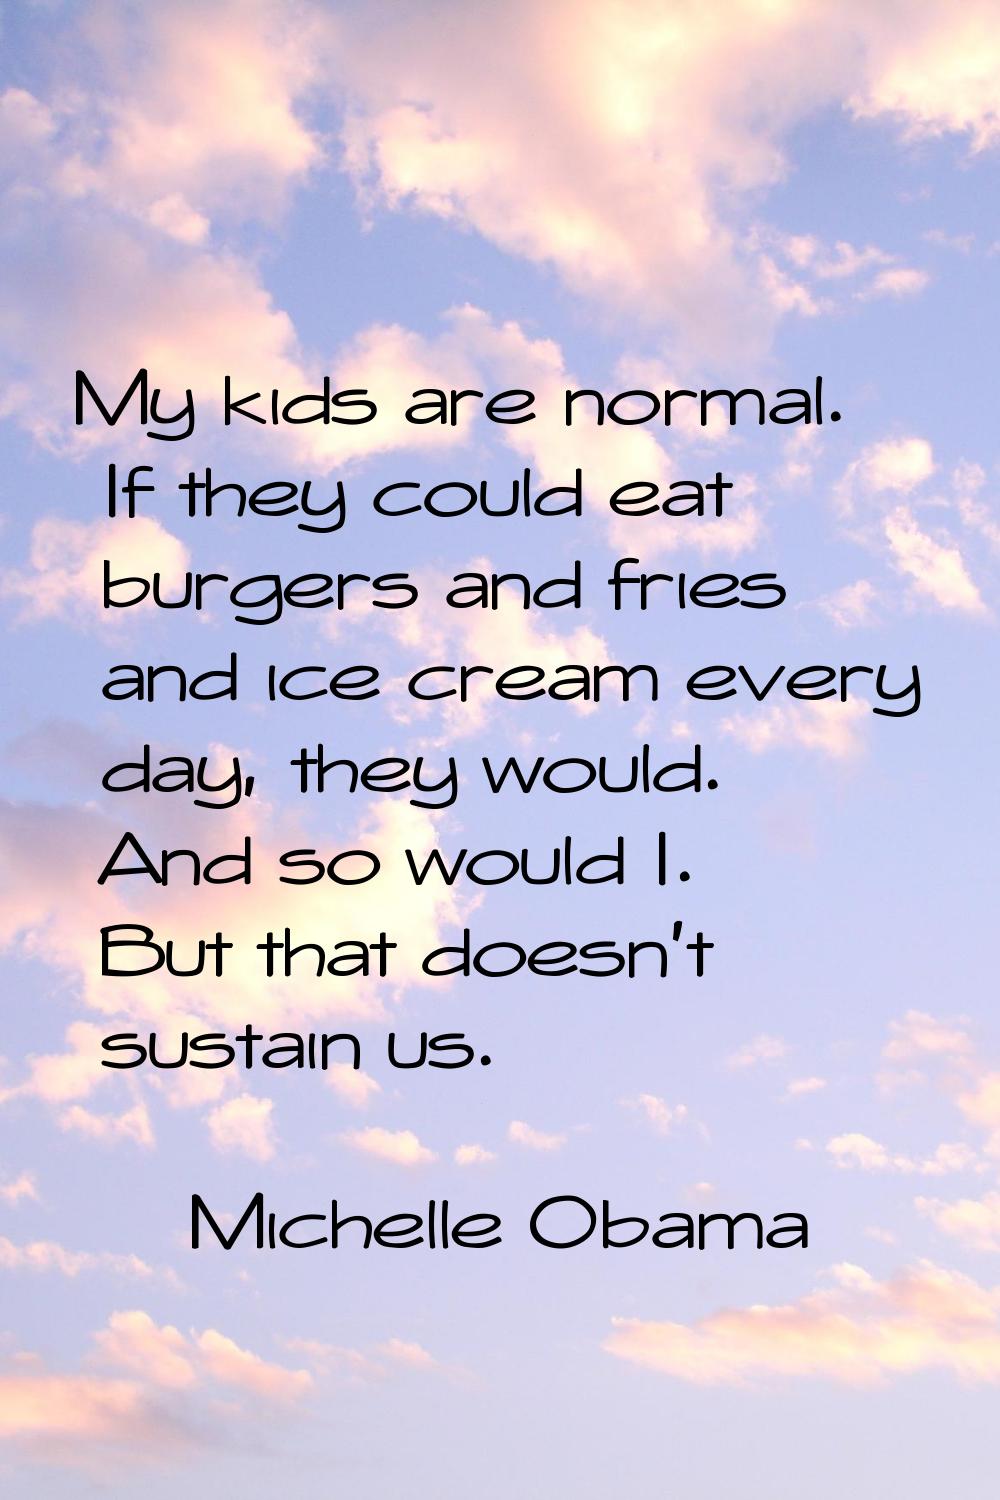 My kids are normal. If they could eat burgers and fries and ice cream every day, they would. And so